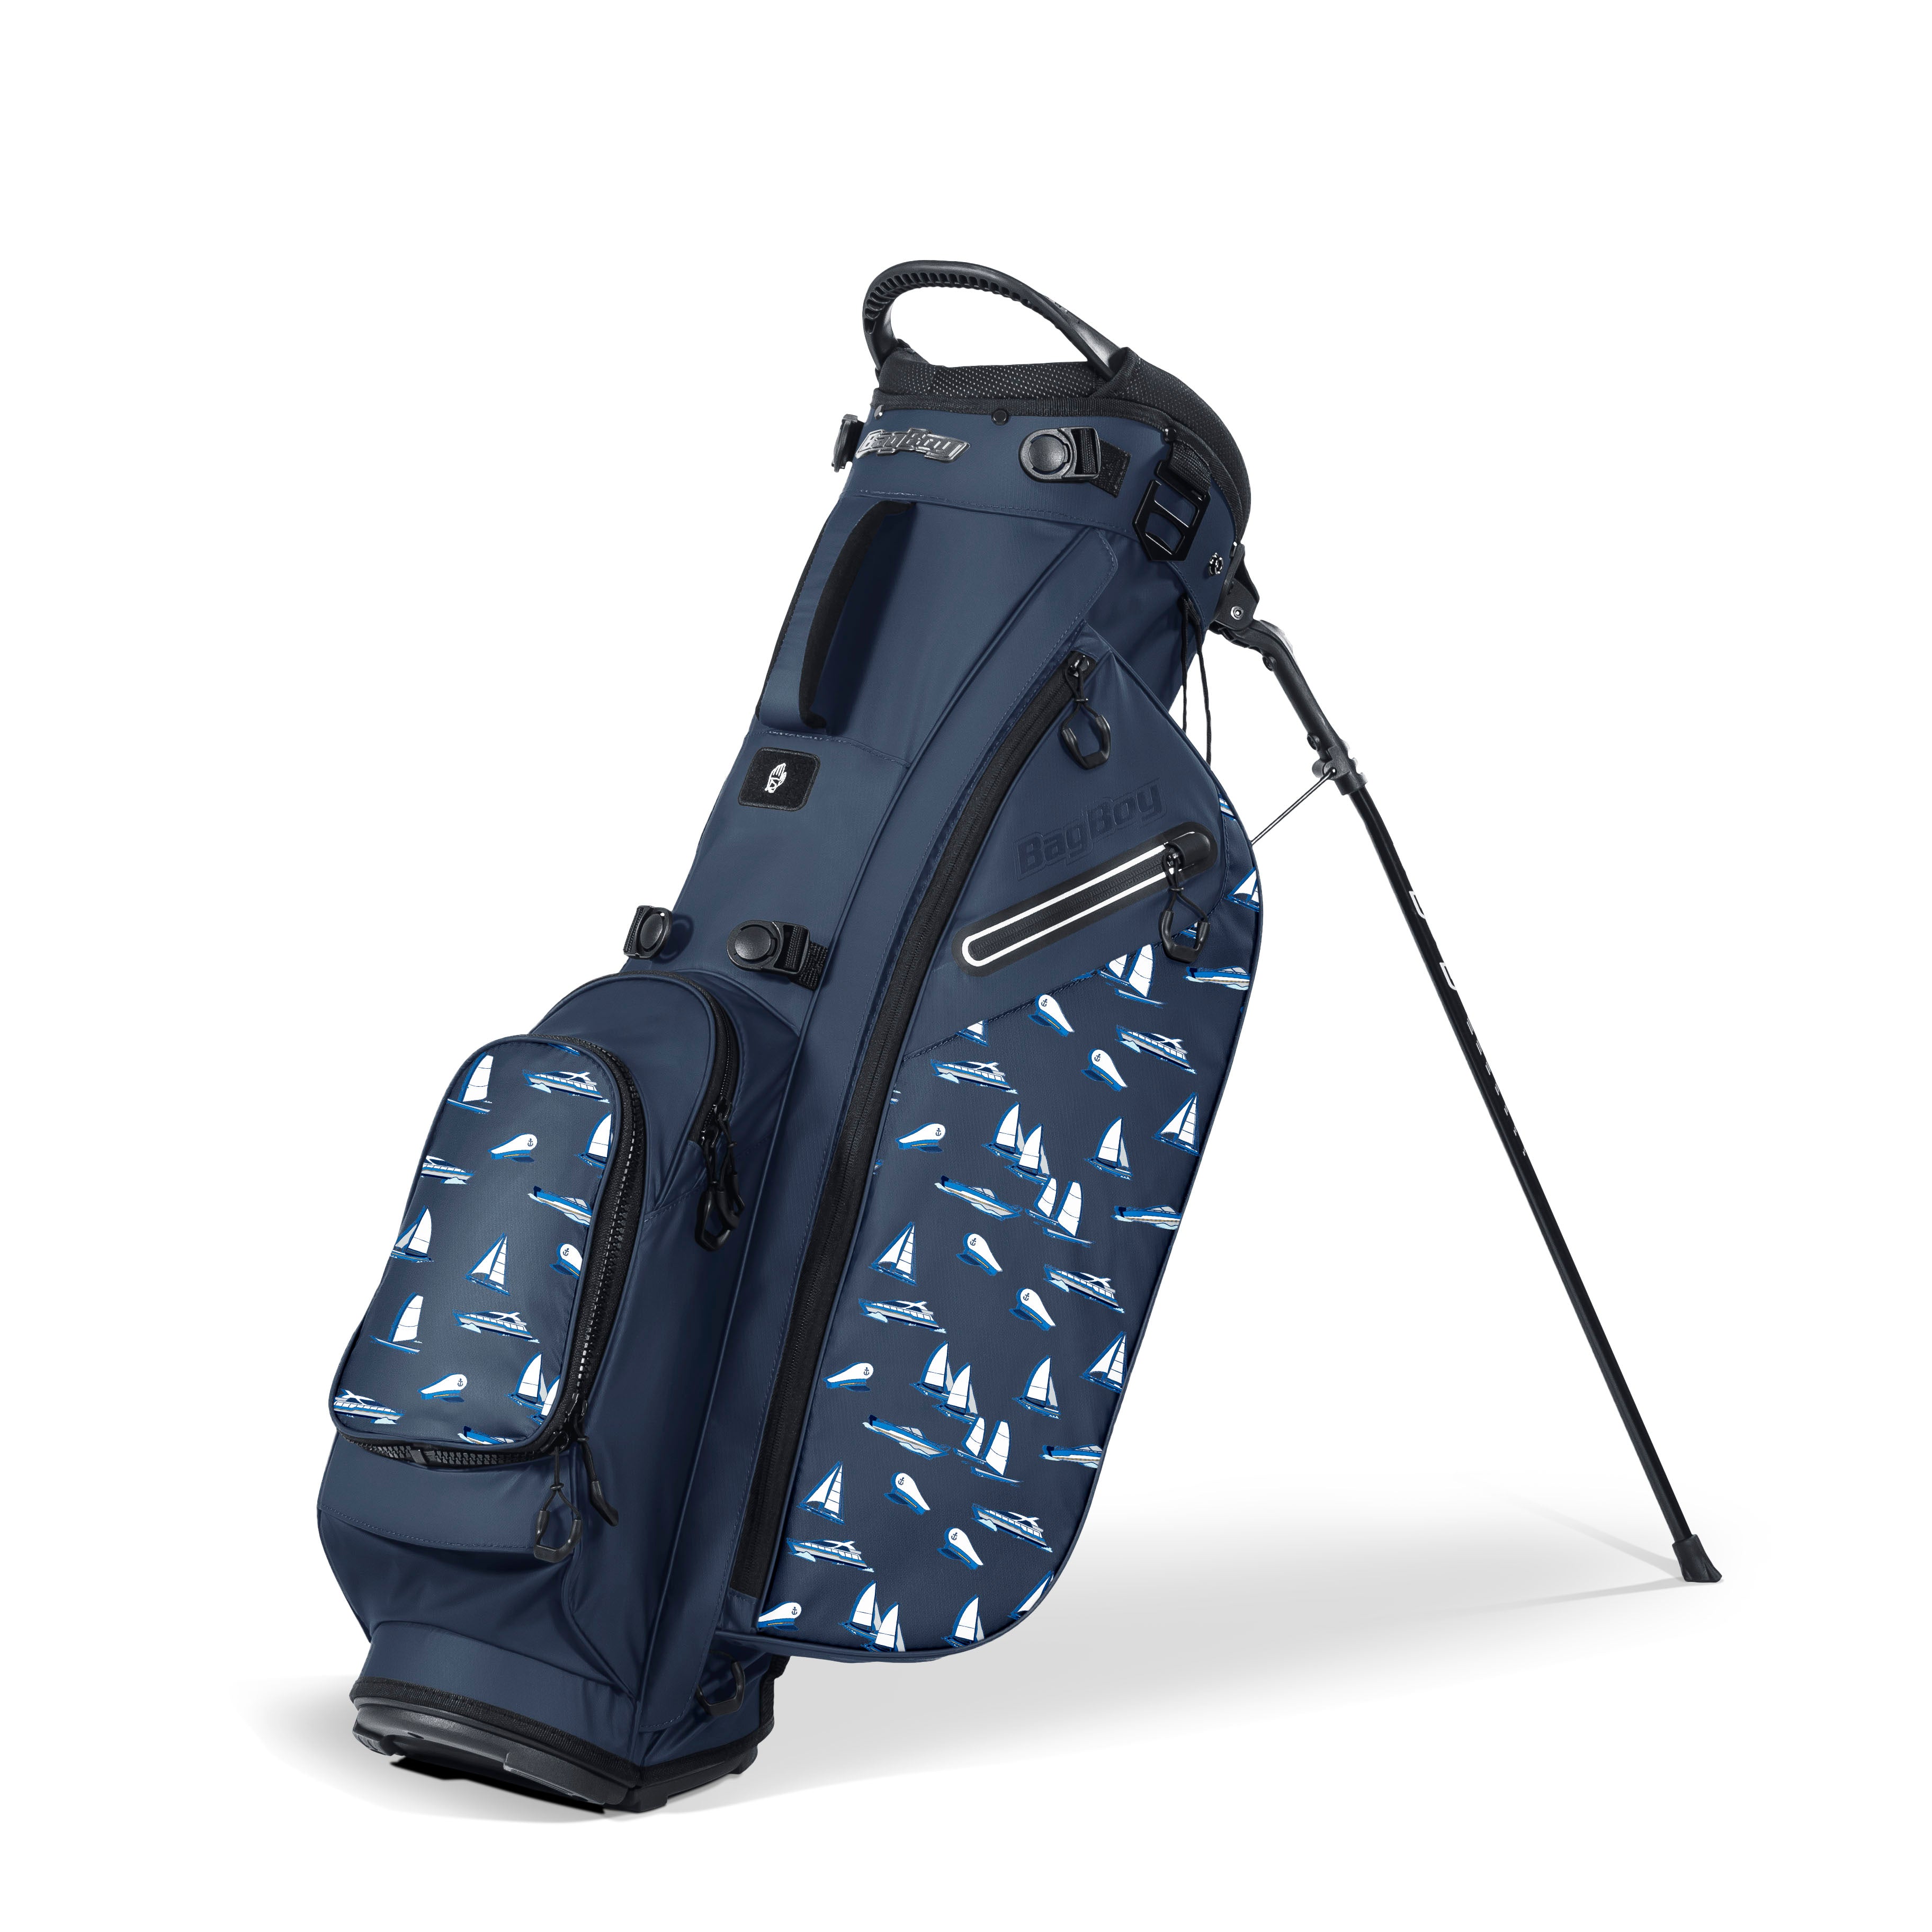 How to Organize a Golf Bag - Life with Less Mess